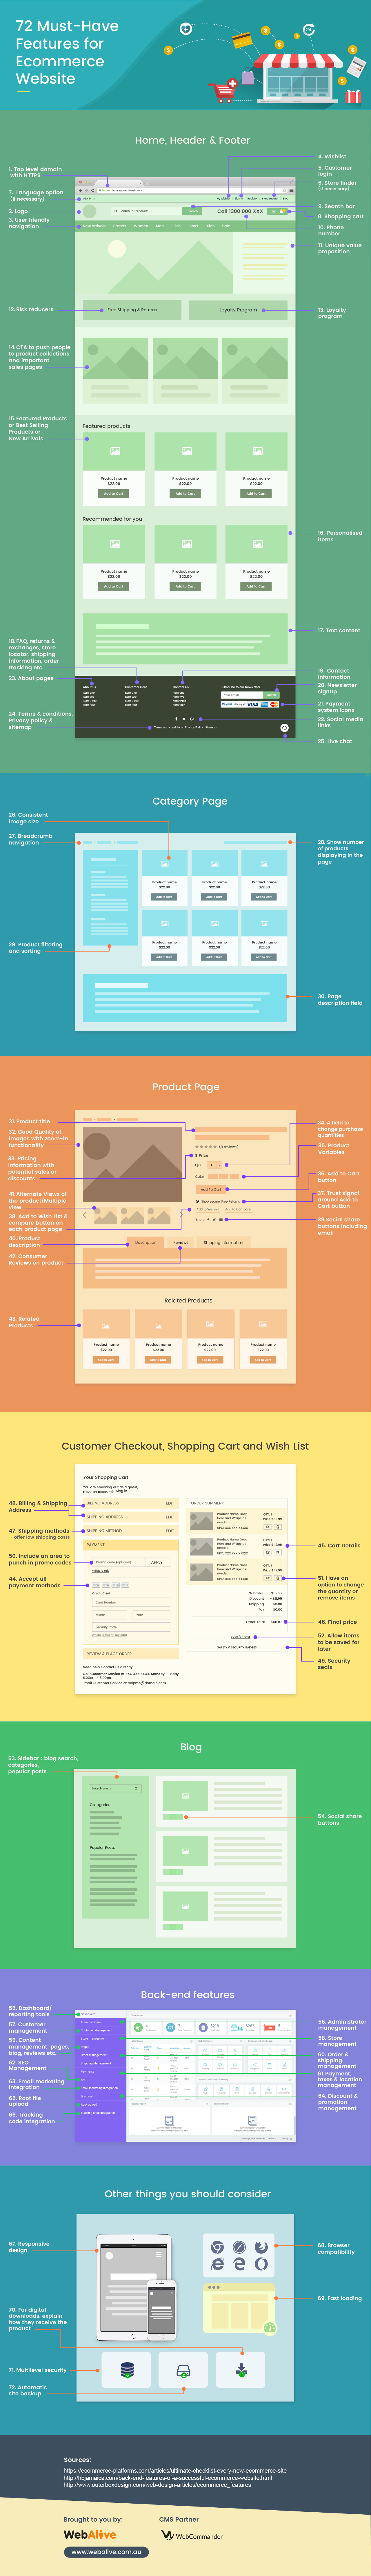 72 Must-Have Features for eCommerce Website [Infographic]